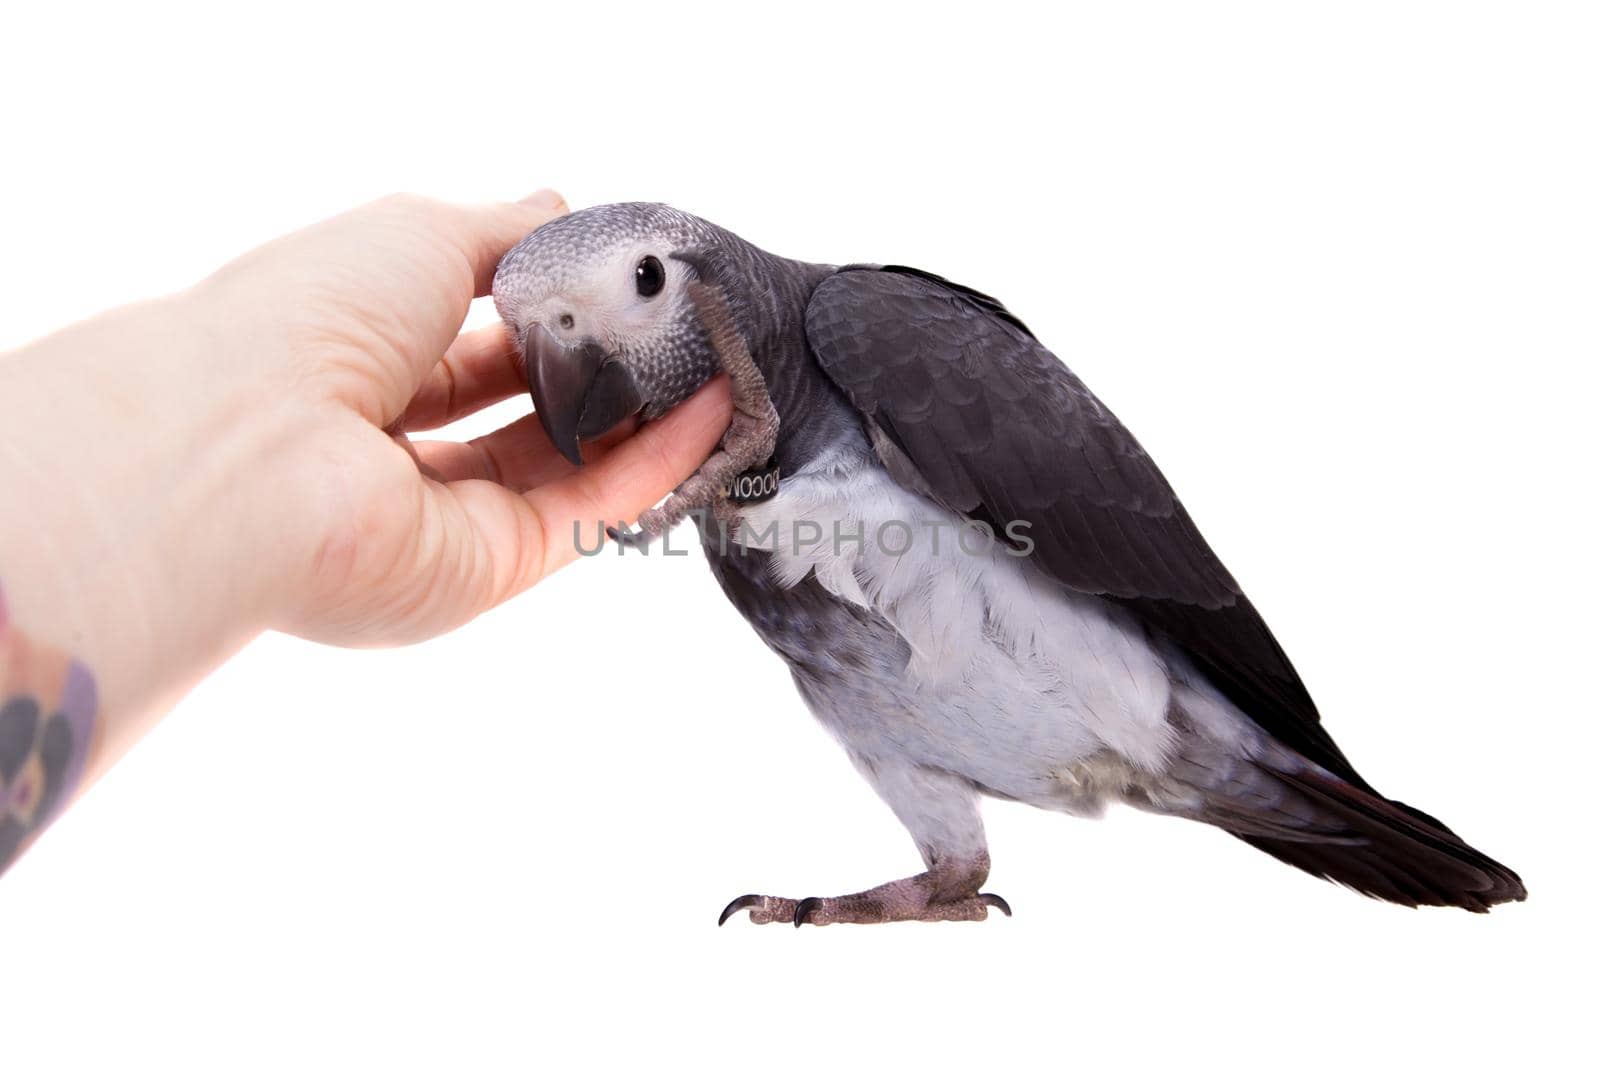 African Grey Parrot, Psittacus erithacus timneh, isolated on white background